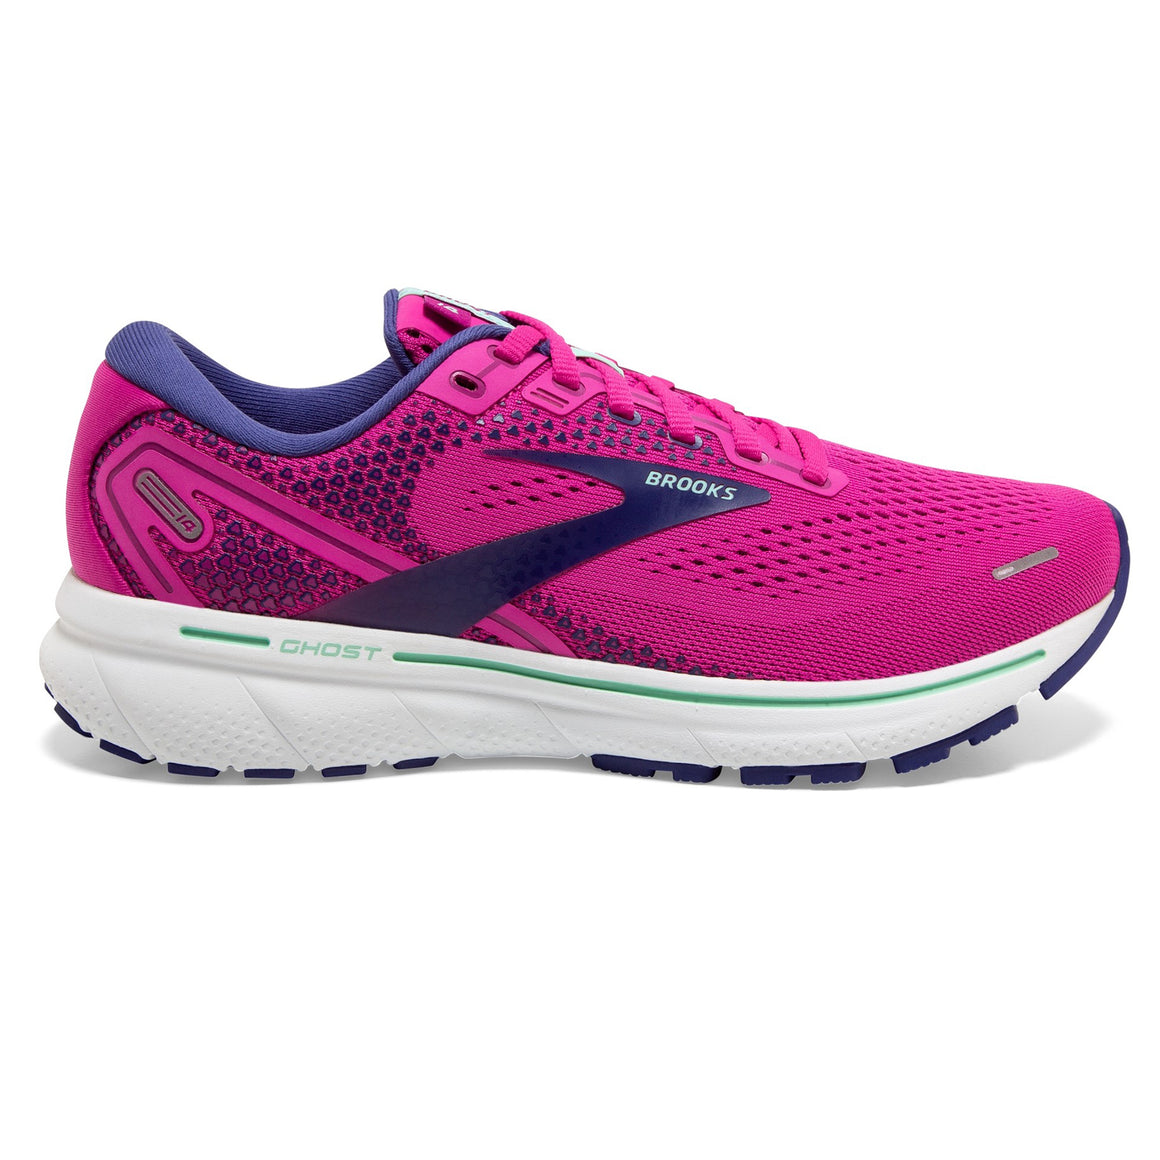 Brooks Running Shoes – That Shoe Store and More